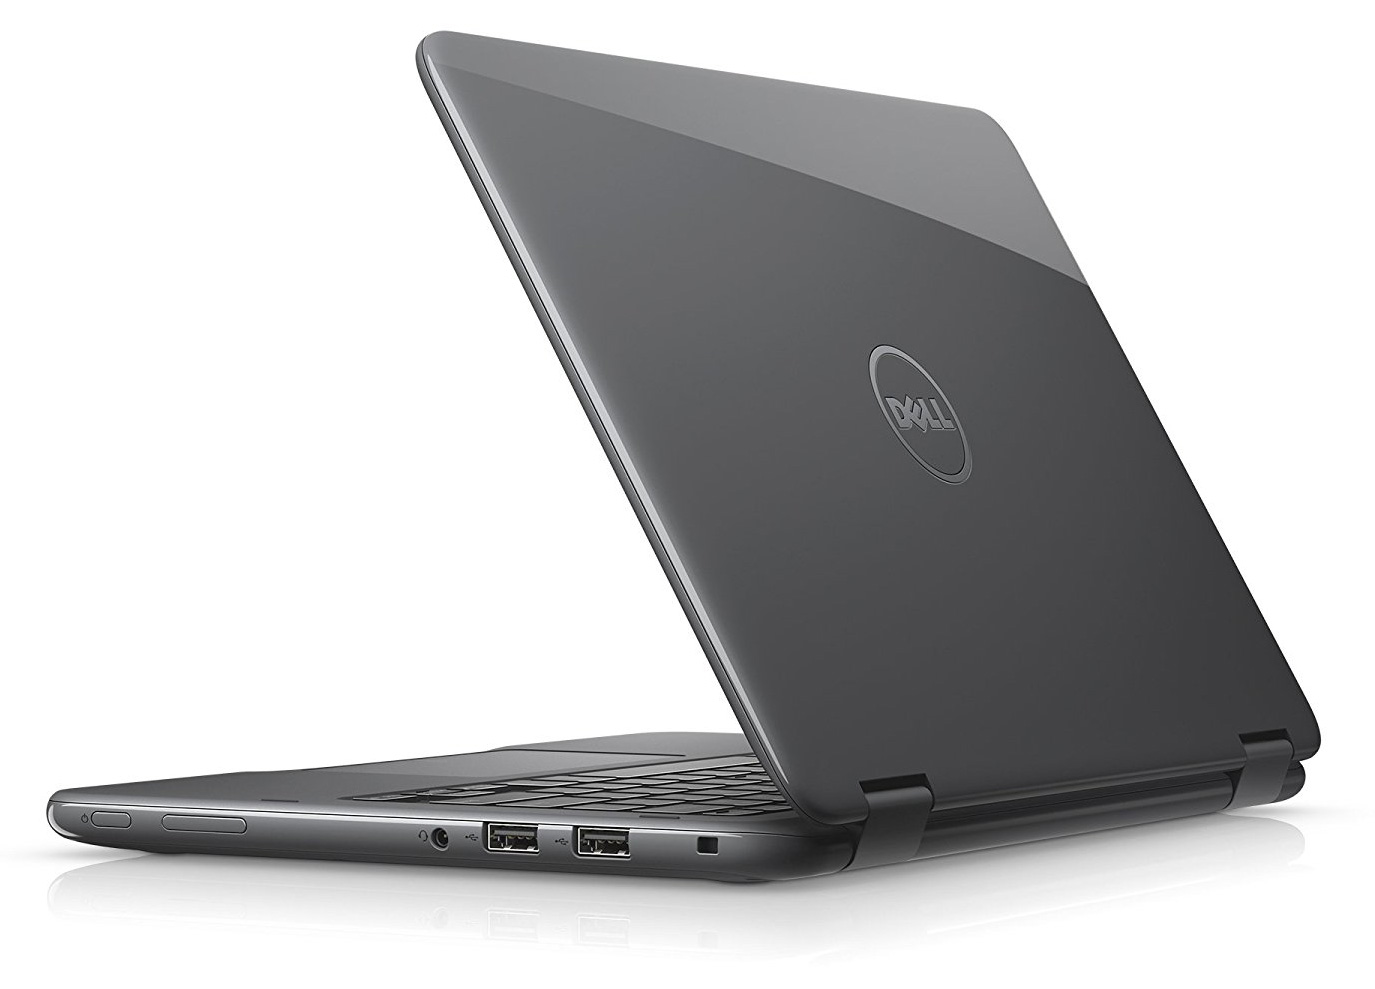 Dell Inspiron 11 3179 - Specs, Tests, and Prices | LaptopMedia.com